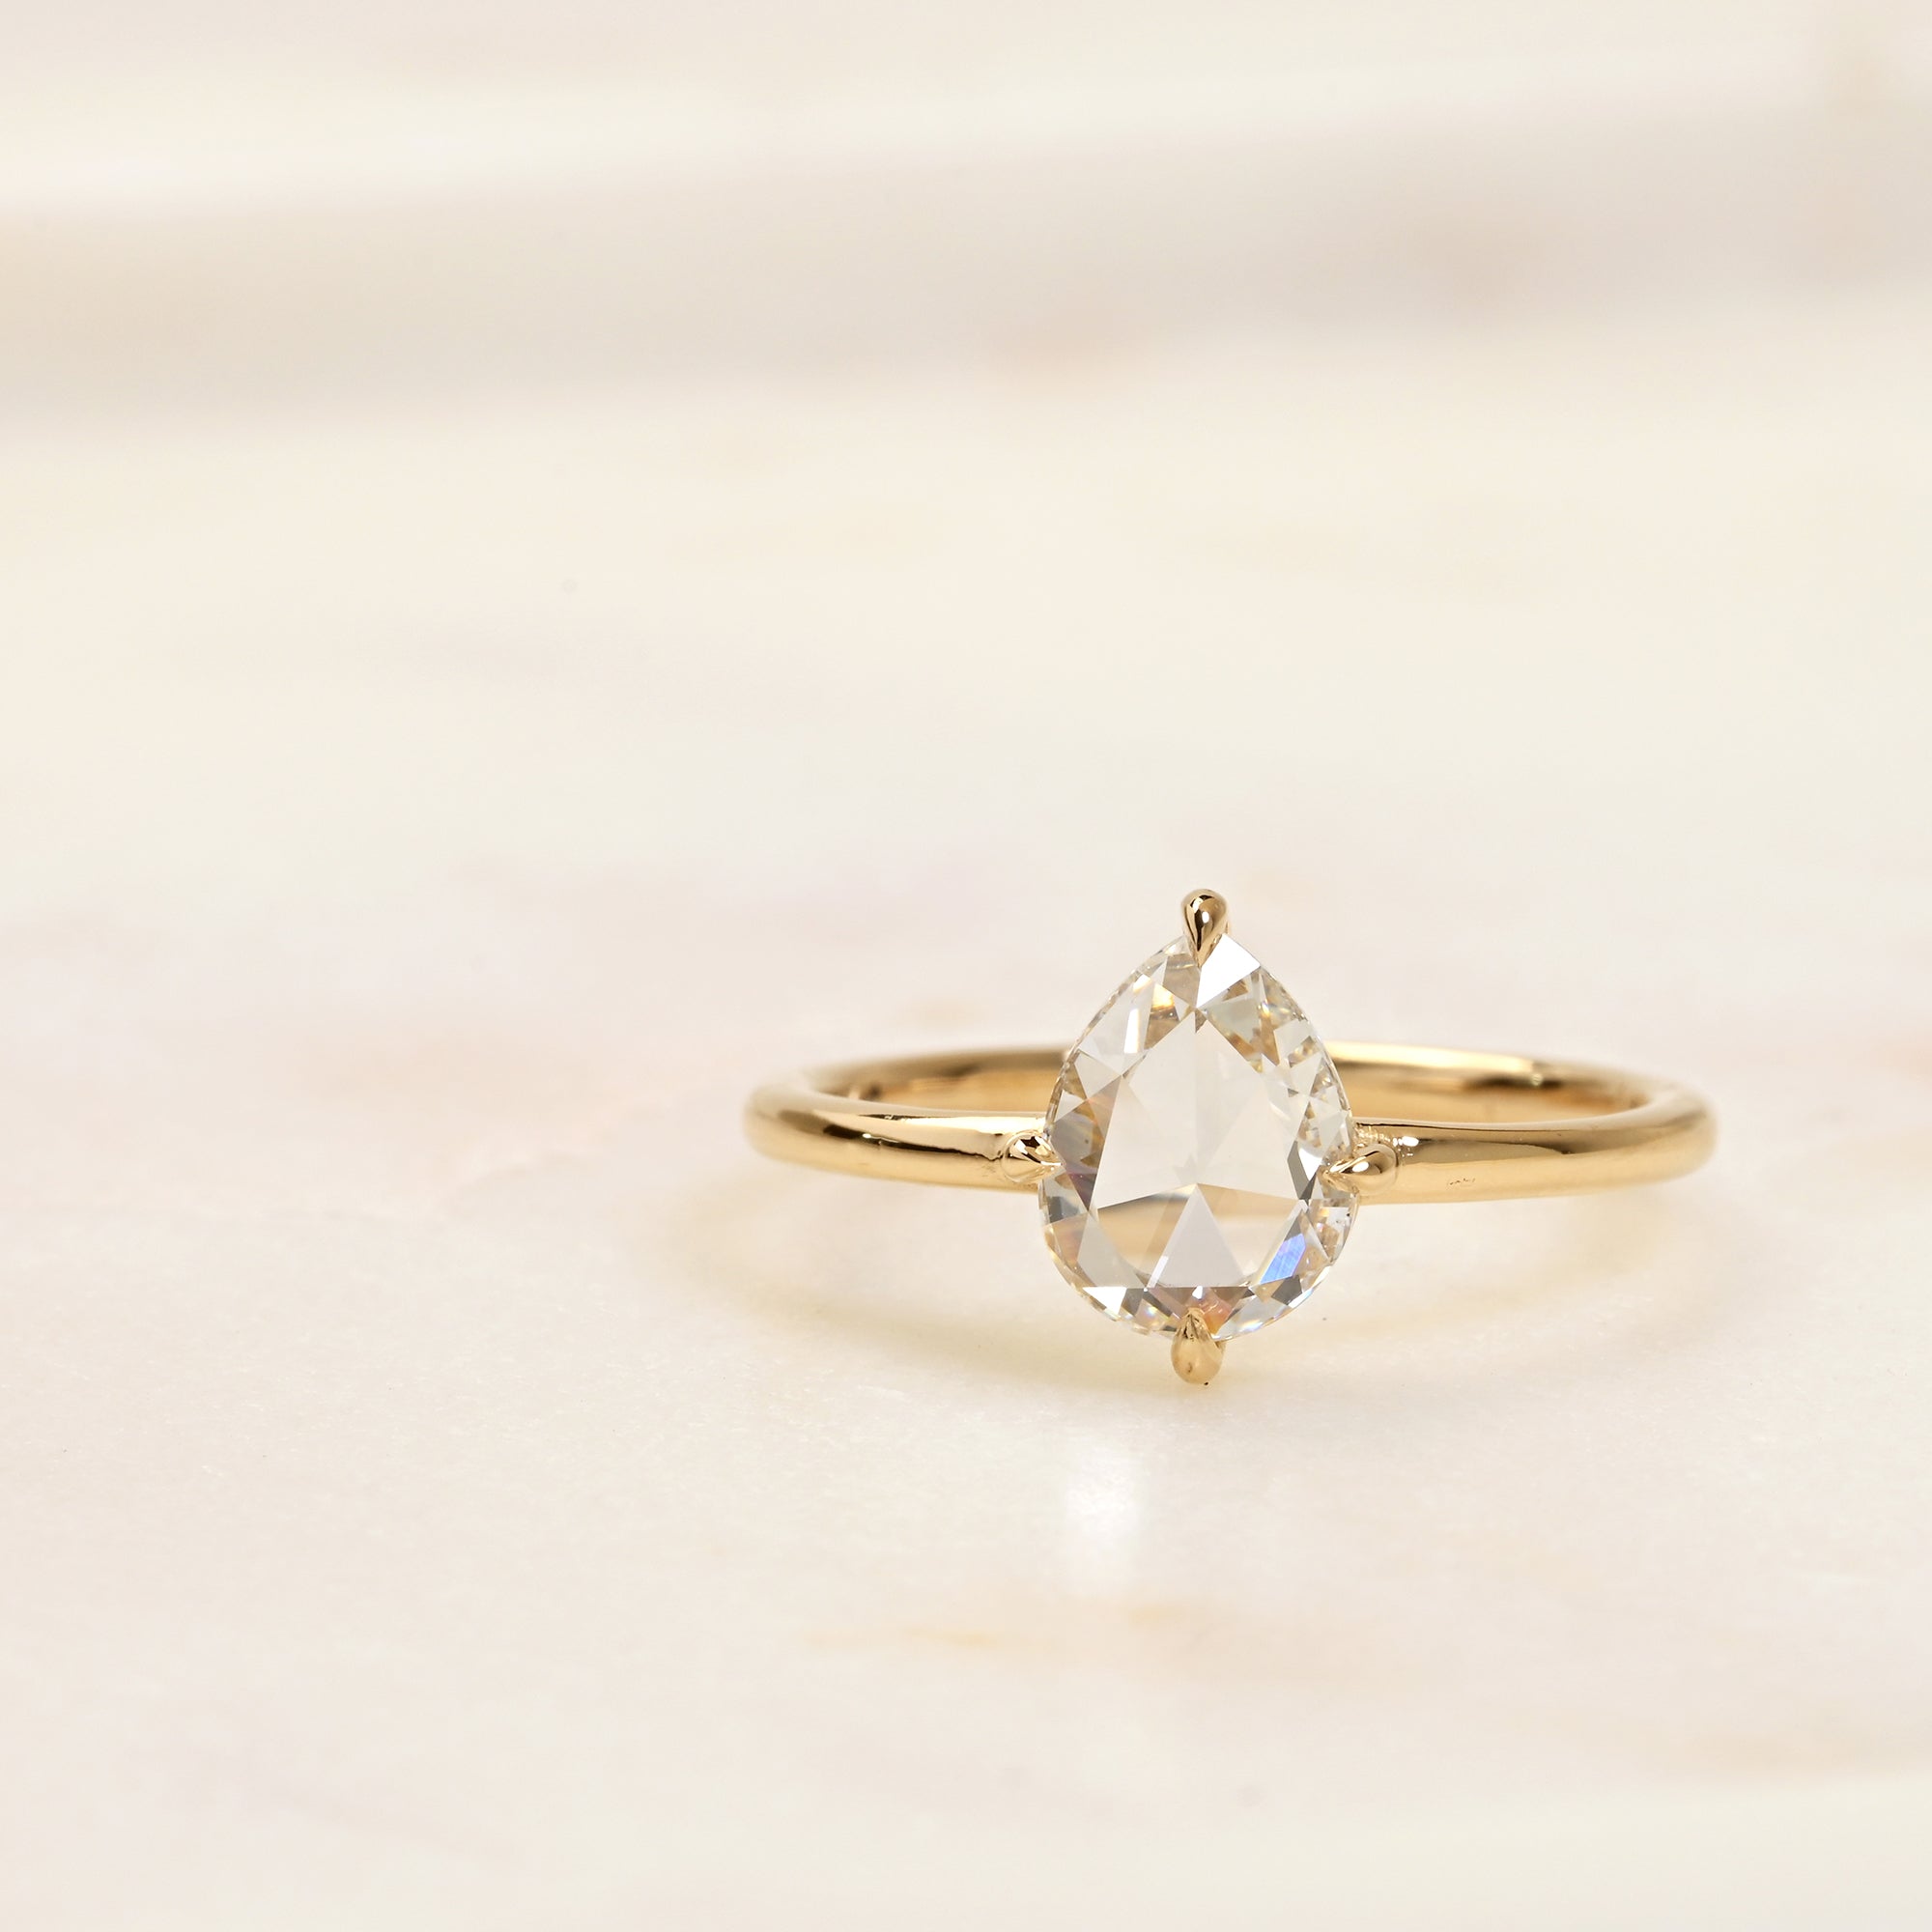 Rose cut pear diamond in a 14k yellow gold solitaire engagement ring setting